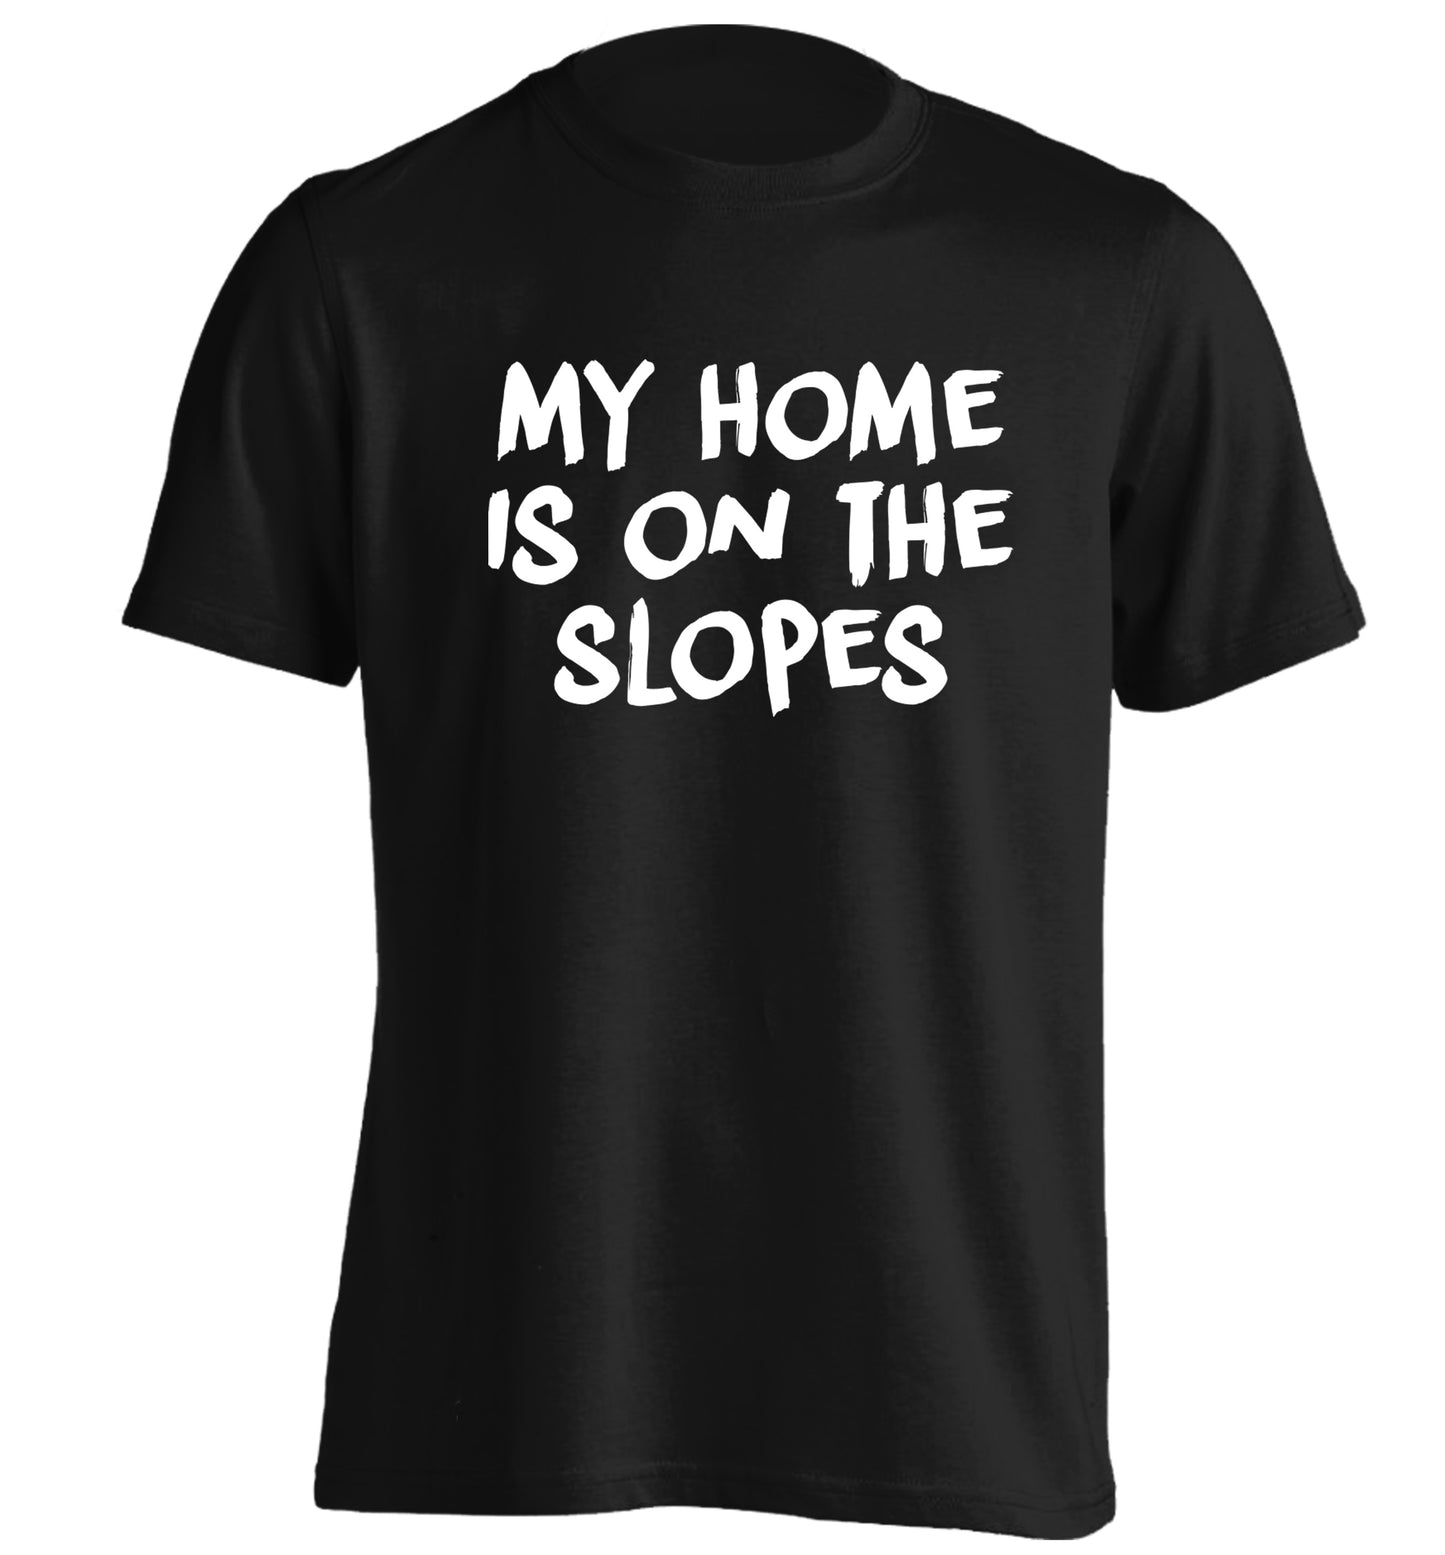 My home is on the slopes adults unisexblack Tshirt 2XL